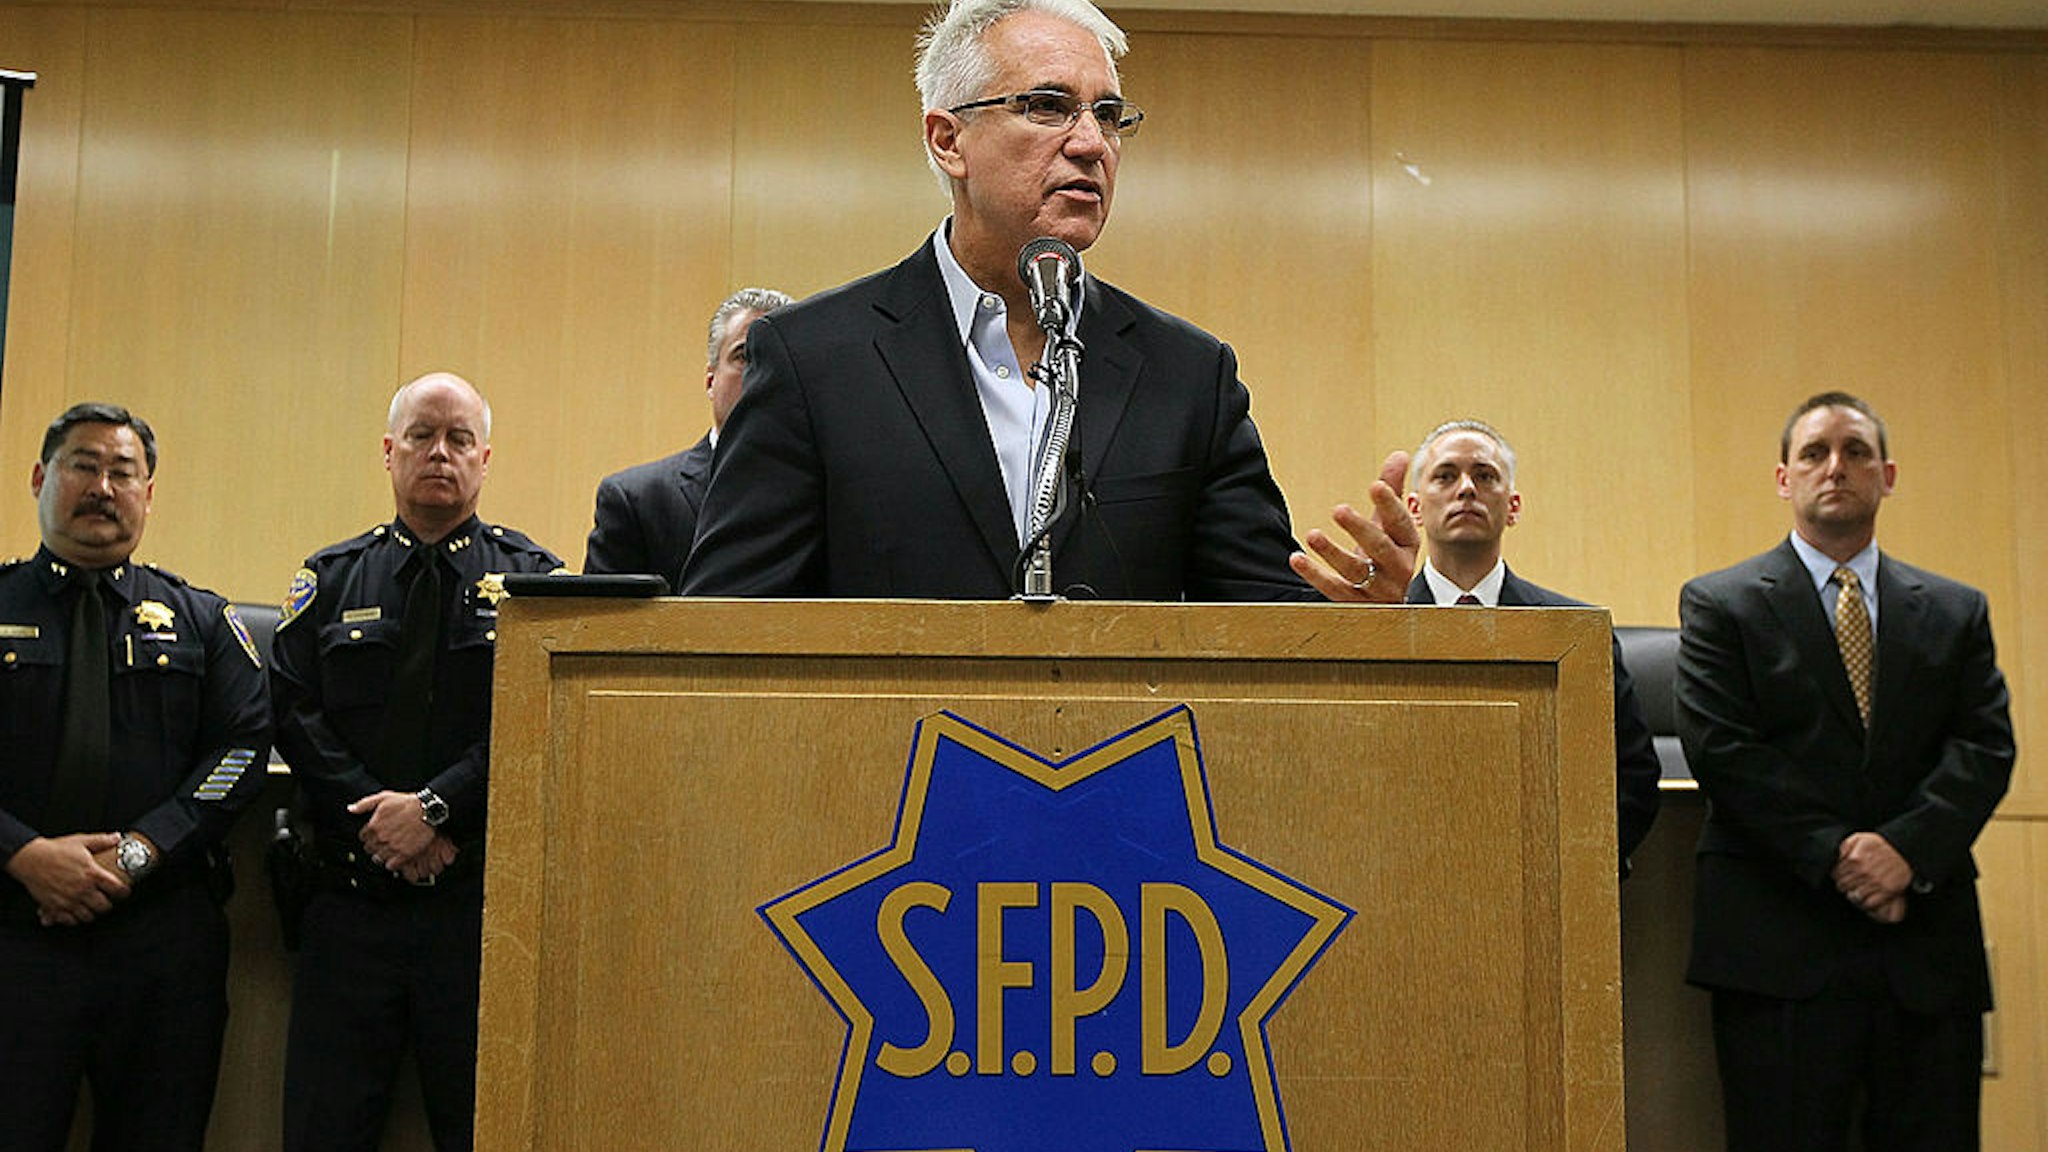 San Francisco Police Chief George Gascon speaks during a news conference at the San Francisco Hall of Justice May 5, 2010 in San Francisco, California.